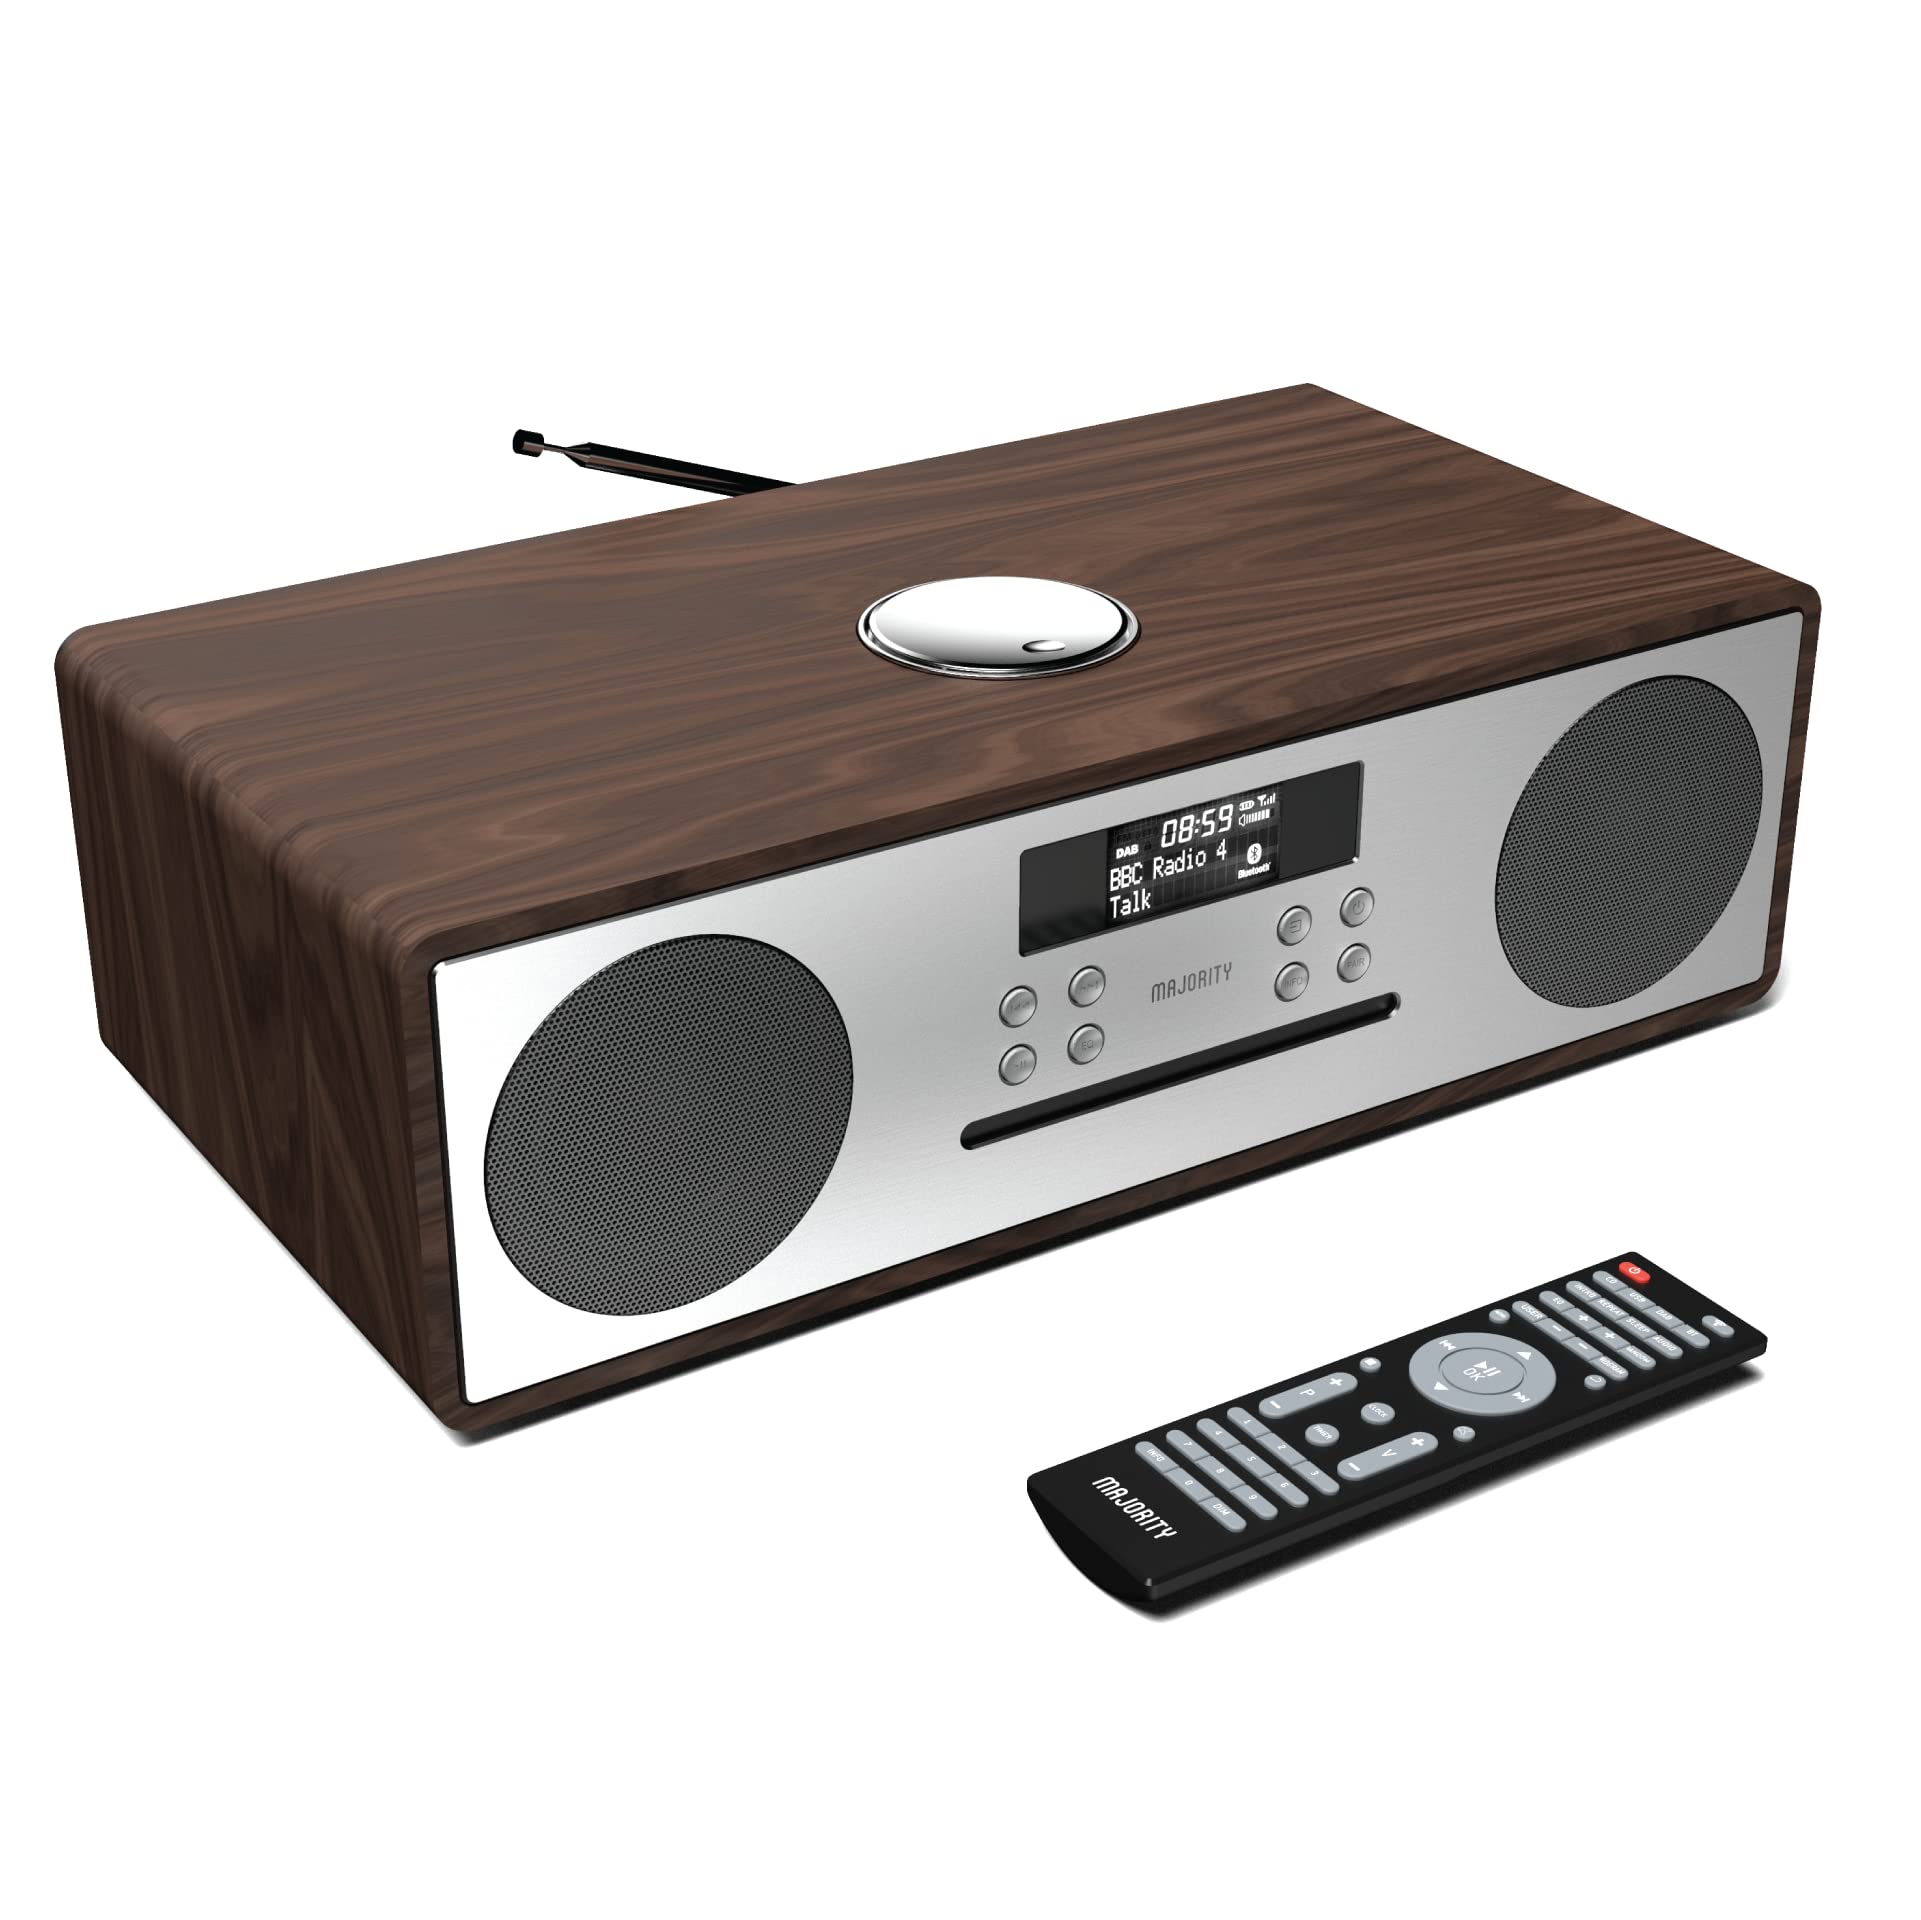 CD Player with FM, DAB and DAB+ Digital Radio | Bluetooth CD Stereo System with Remote, Aux, USB Input and LED Display | Majority Oakington | Compact Hi-Fi with Adjustable Bass and Equalizer | Walnut